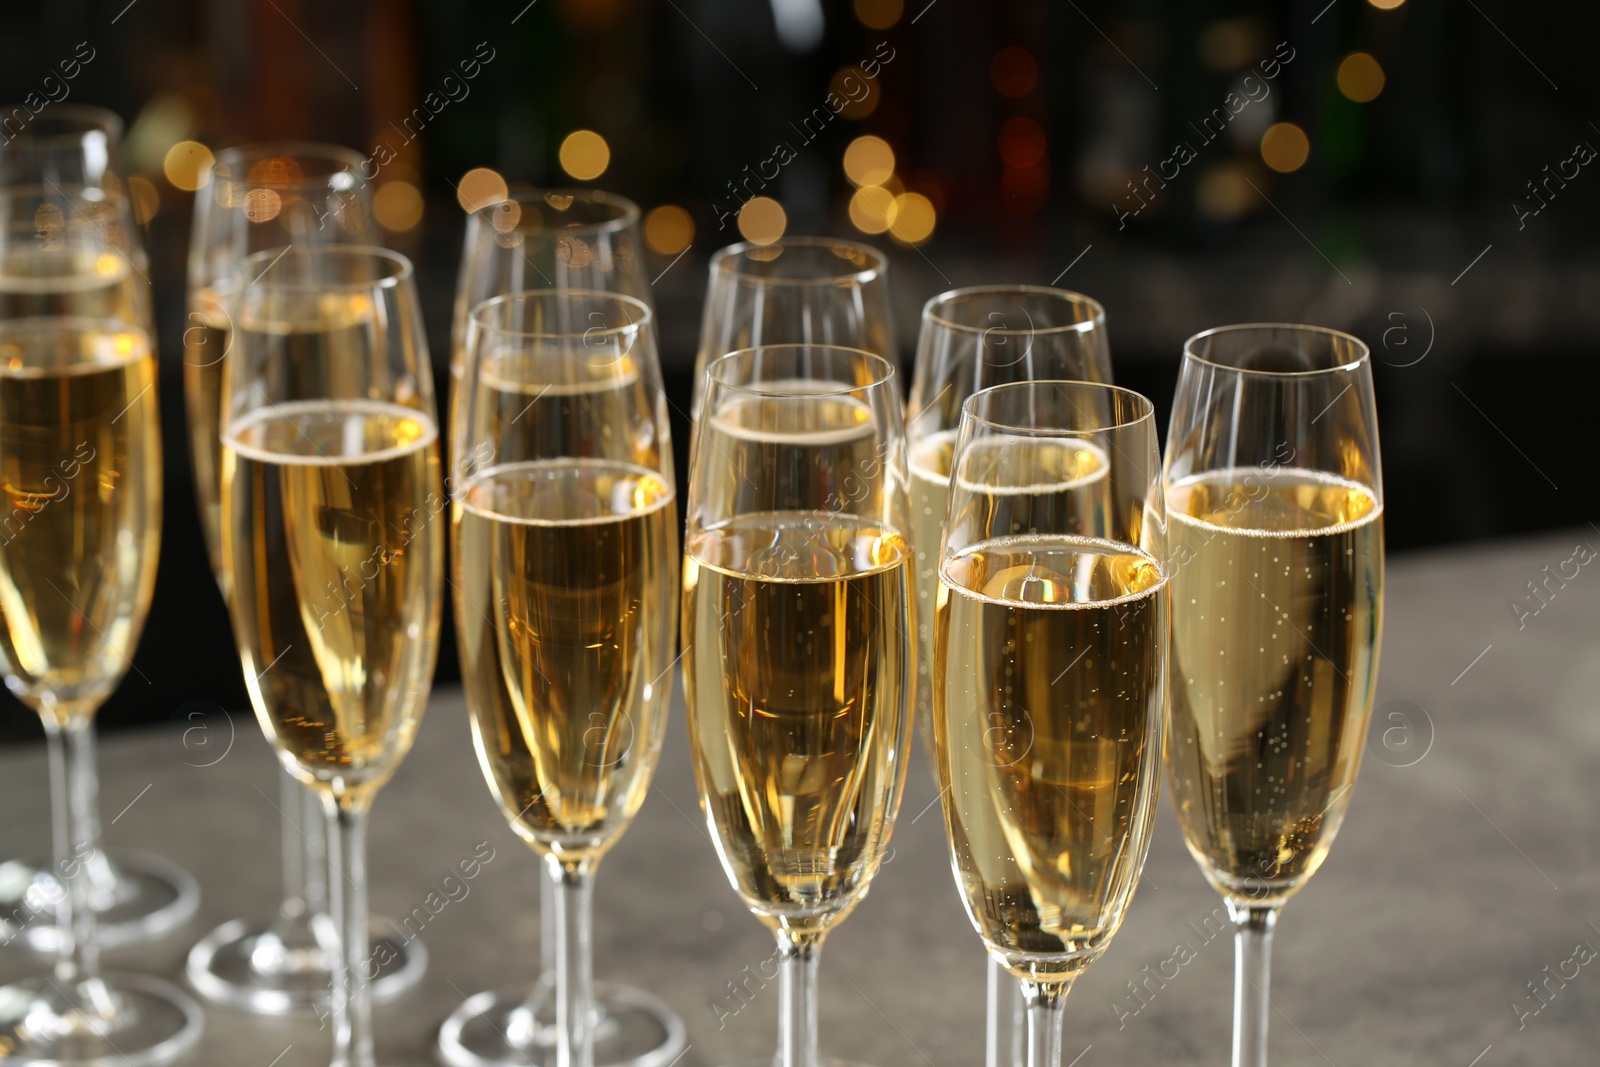 Photo of Glasses of champagne on table against blurred background